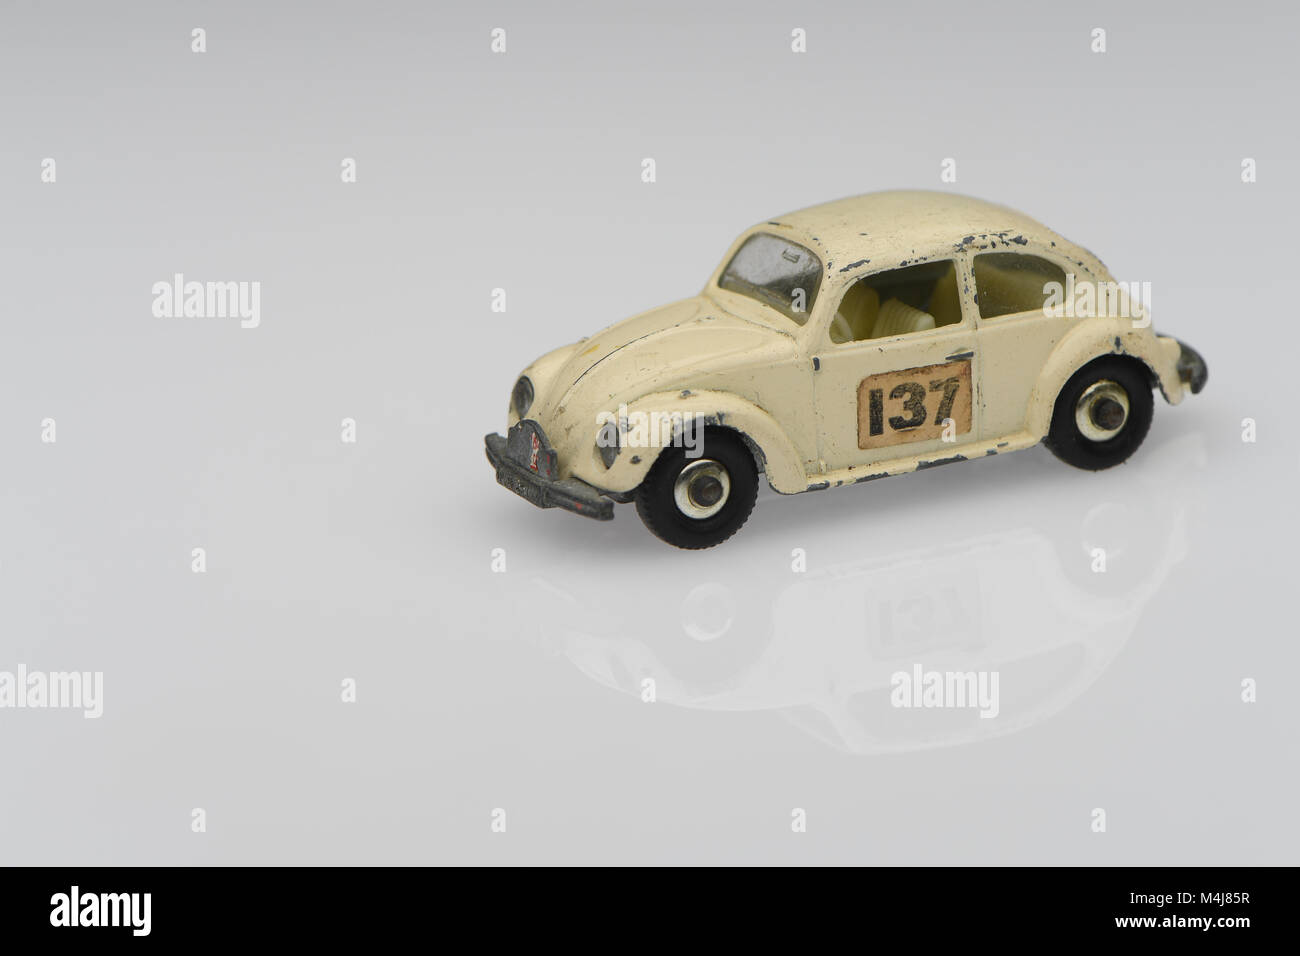 A white vintage 1500 saloon Volkswagen beetle toy race car car showing signs of use on a white background. Stock Photo